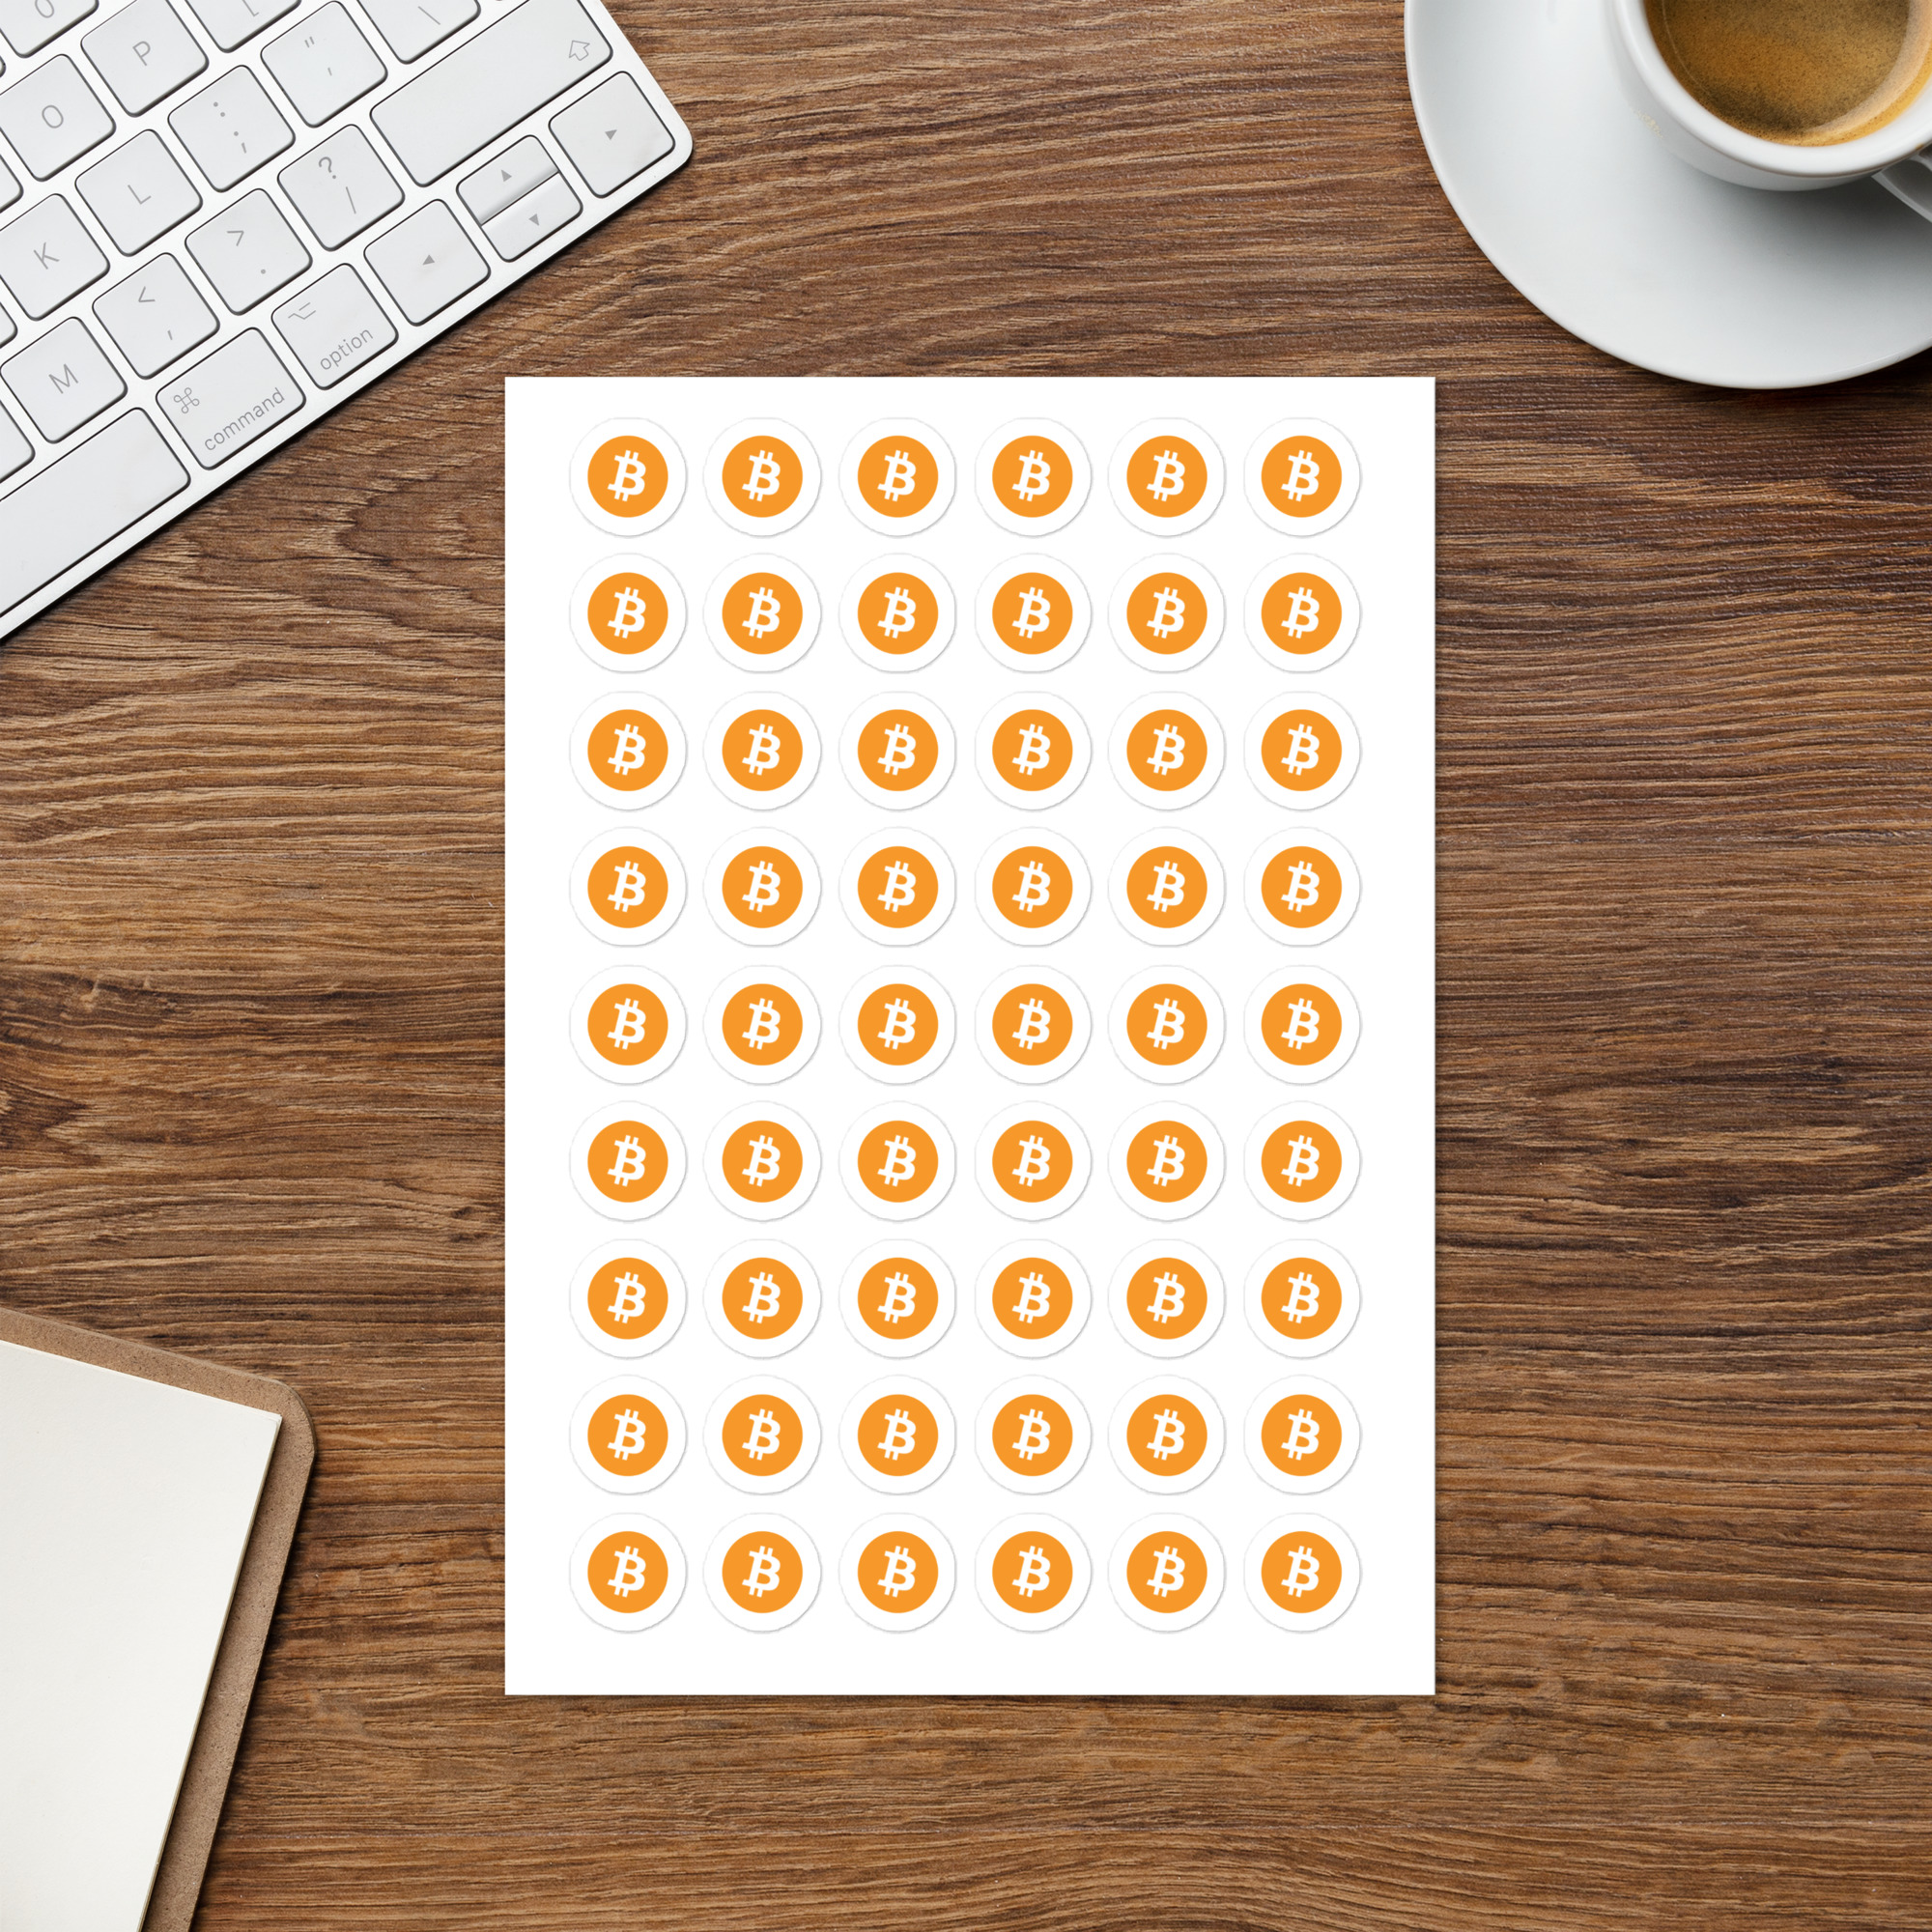 Bitcoin Stickers Sheet on a desk with a keyboard a coffee cup. Featuring 54 stickers for only $6.